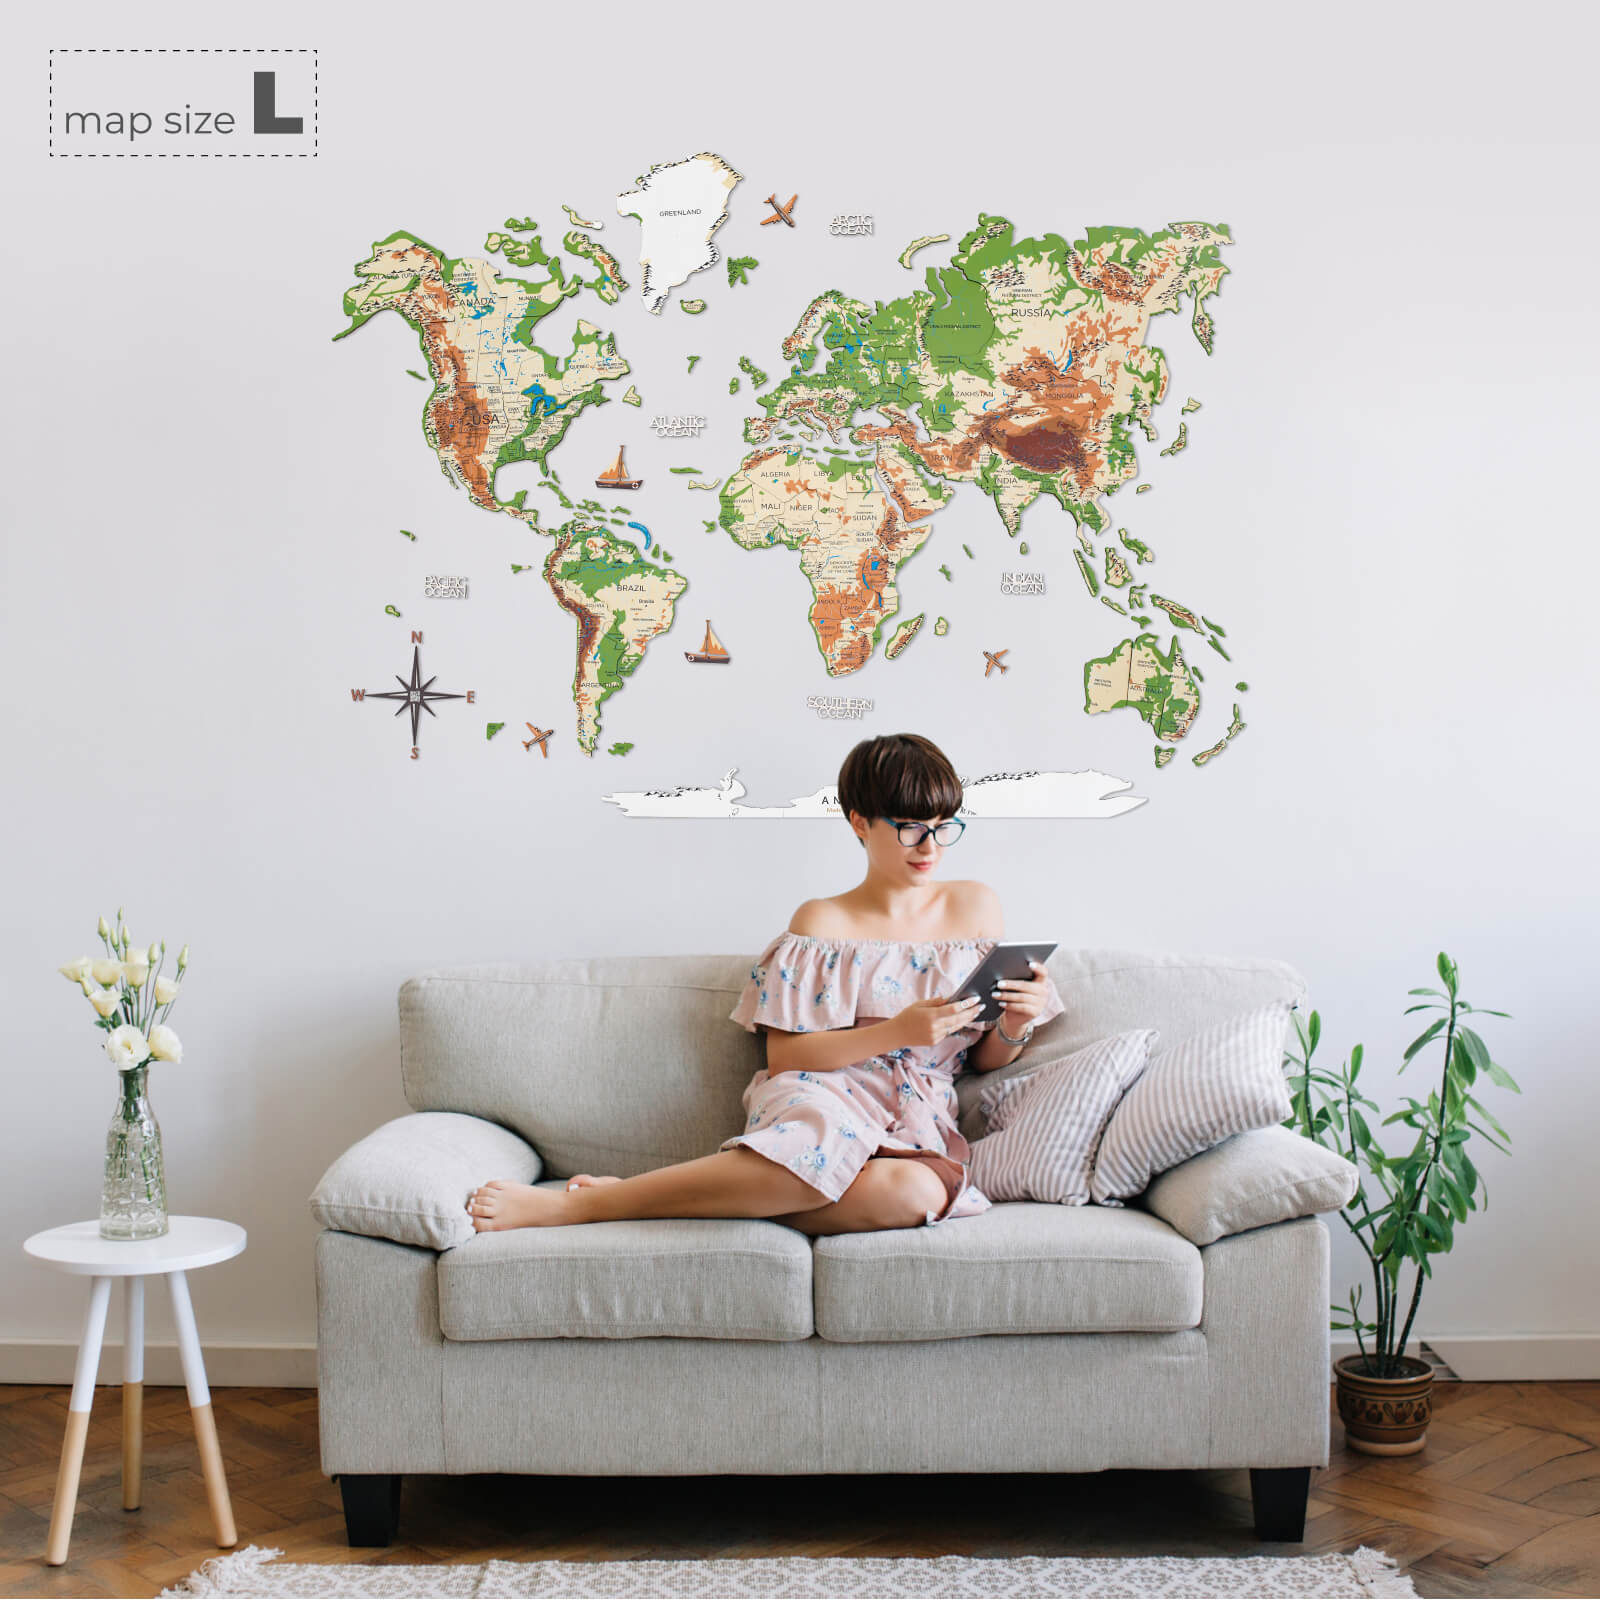 world map with magnetic pins for travel